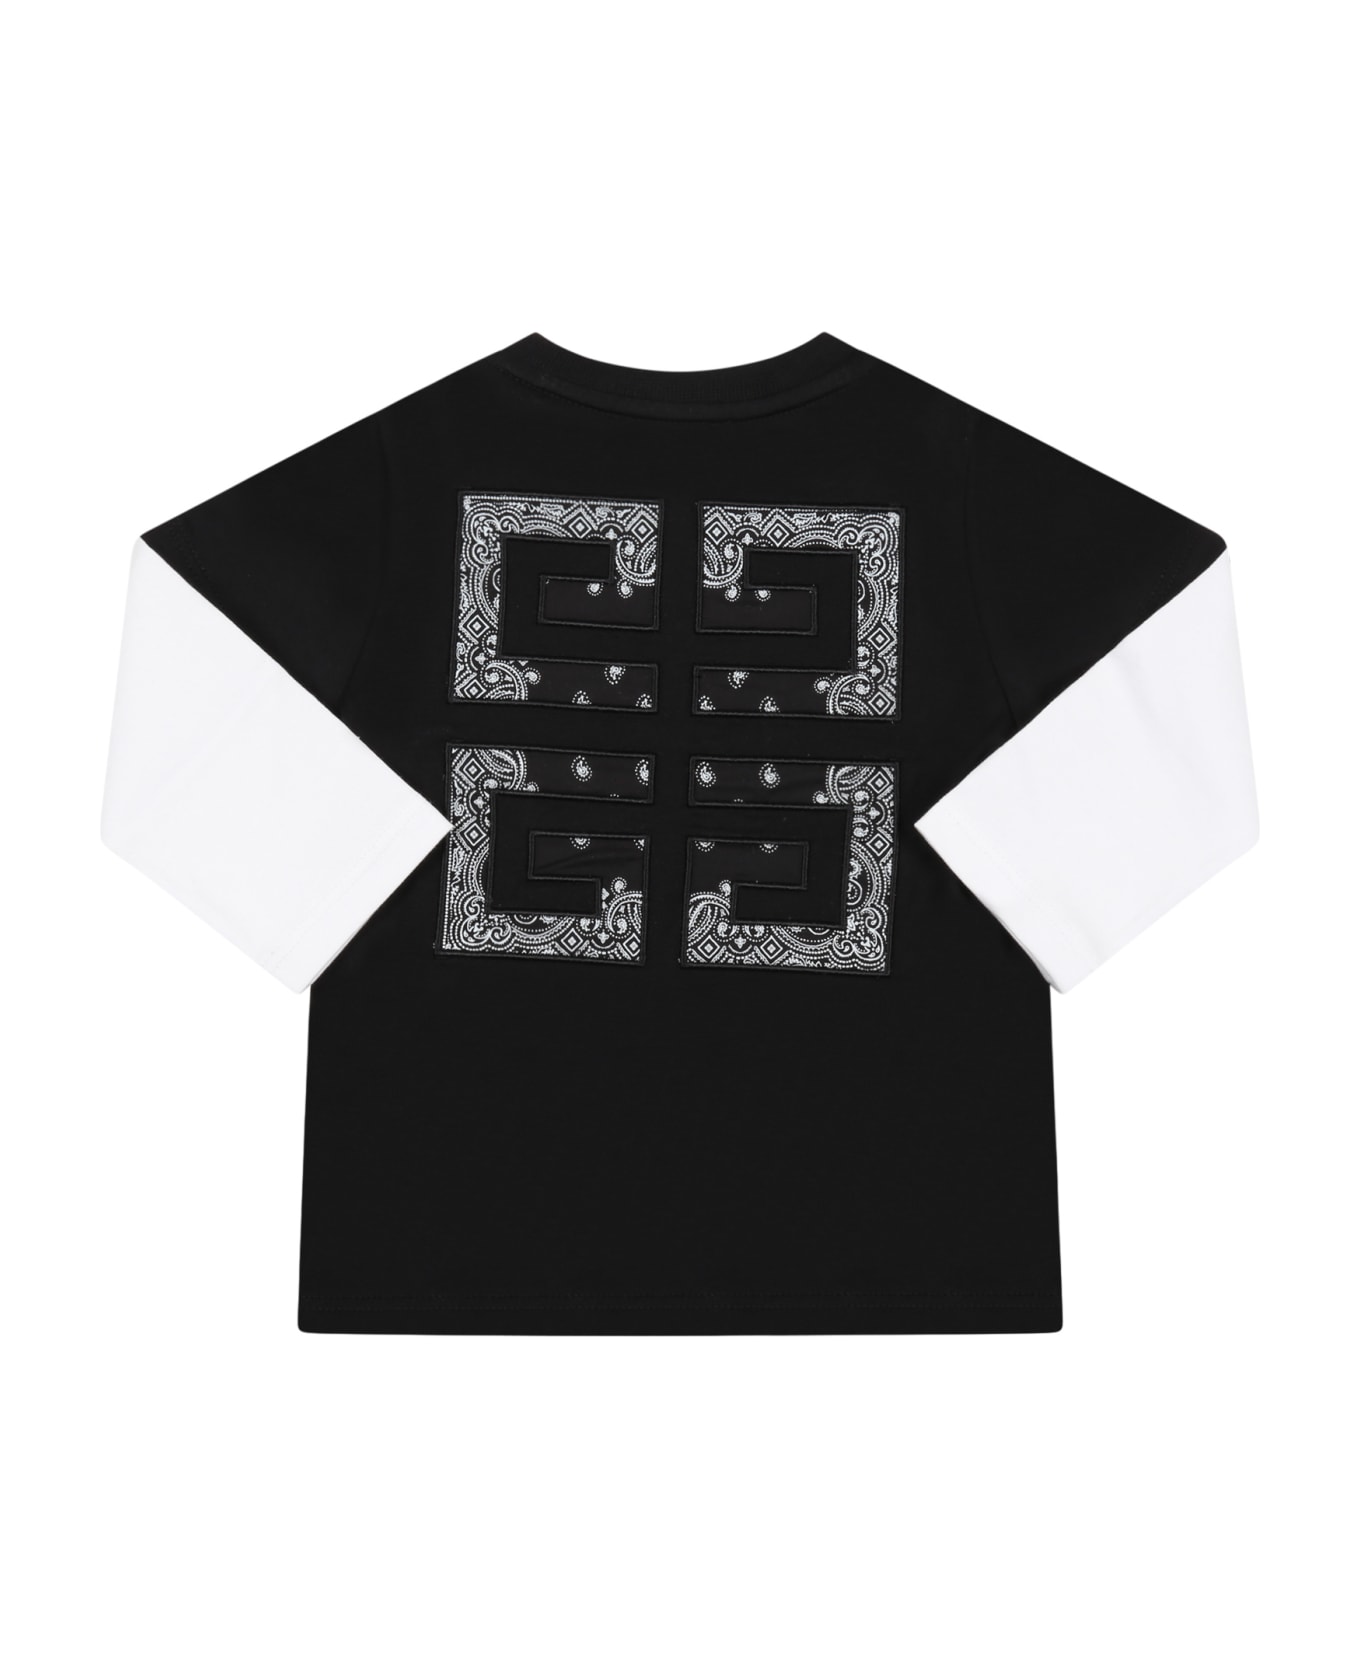 Givenchy Black T-shirt For Baby Kids With Logo - Black